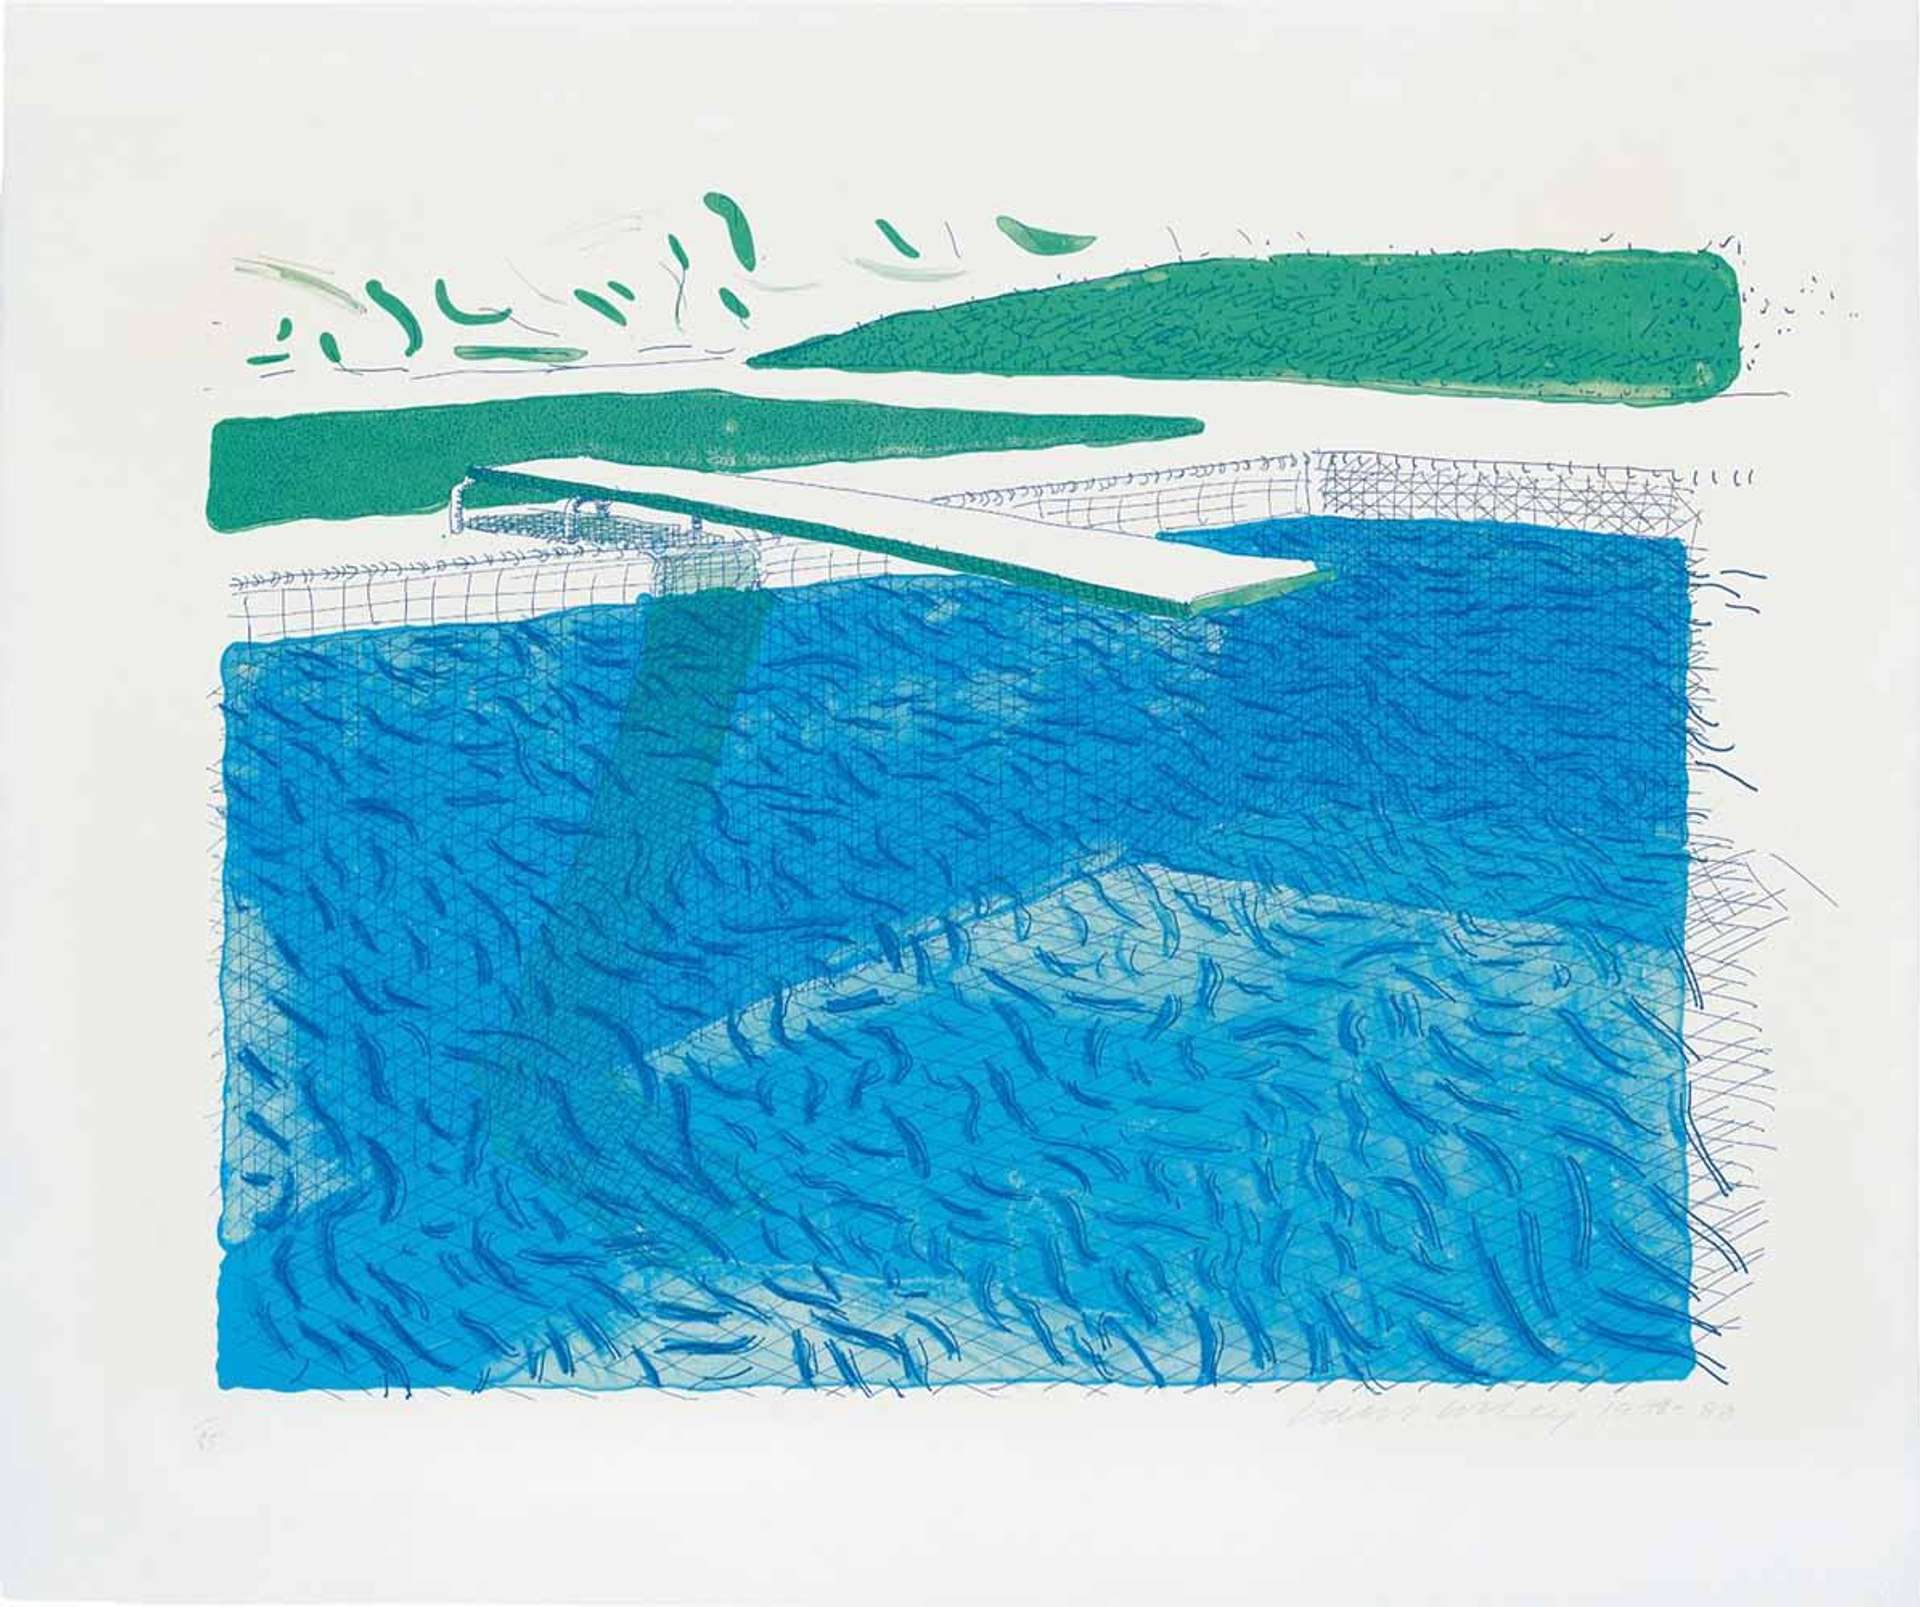 A lithograph by David Hockney depicting a blue swimming pool and white diving board, the waves in the water delineated with graphic mark-making